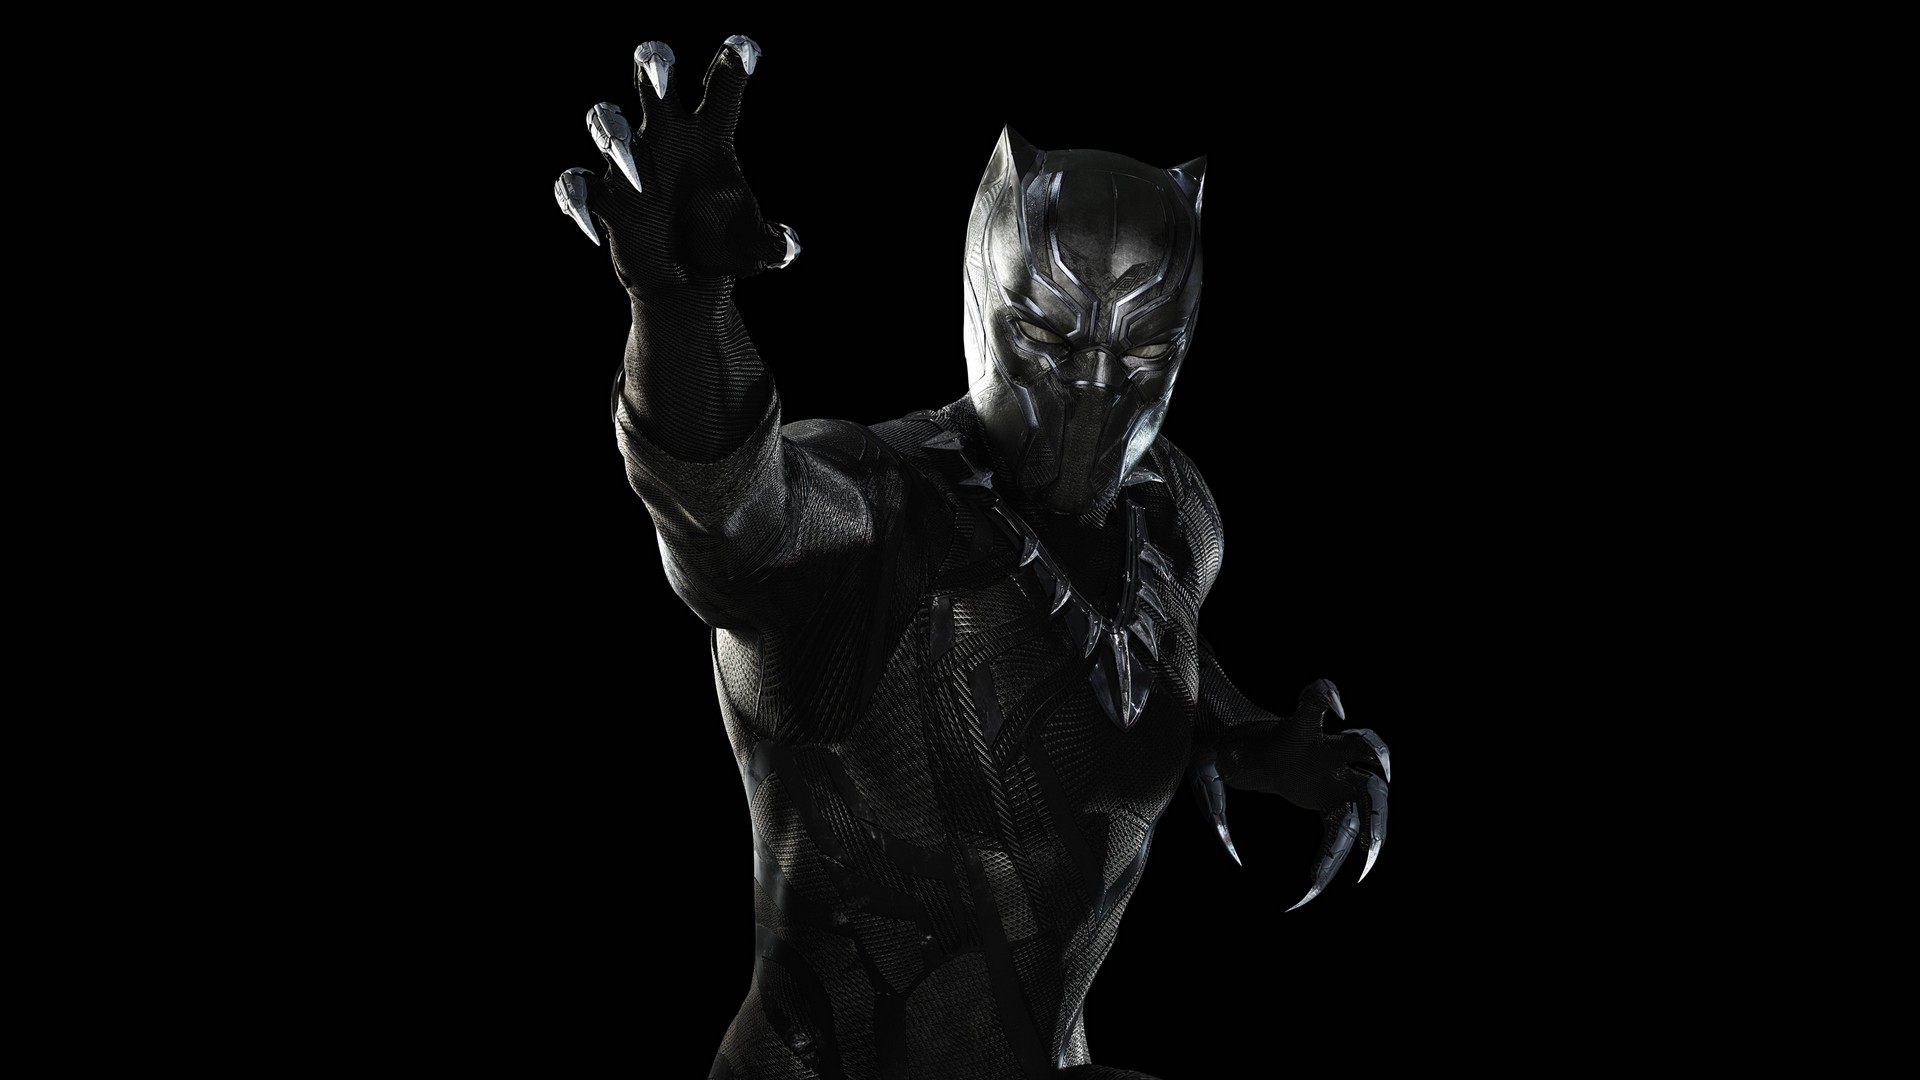 Black Panther Superhero Full Movie Wallpaper with high-resolution 1920x1080 pixel. You can use this poster wallpaper for your Desktop Computers, Mac Screensavers, Windows Backgrounds, iPhone Wallpapers, Tablet or Android Lock screen and another Mobile device